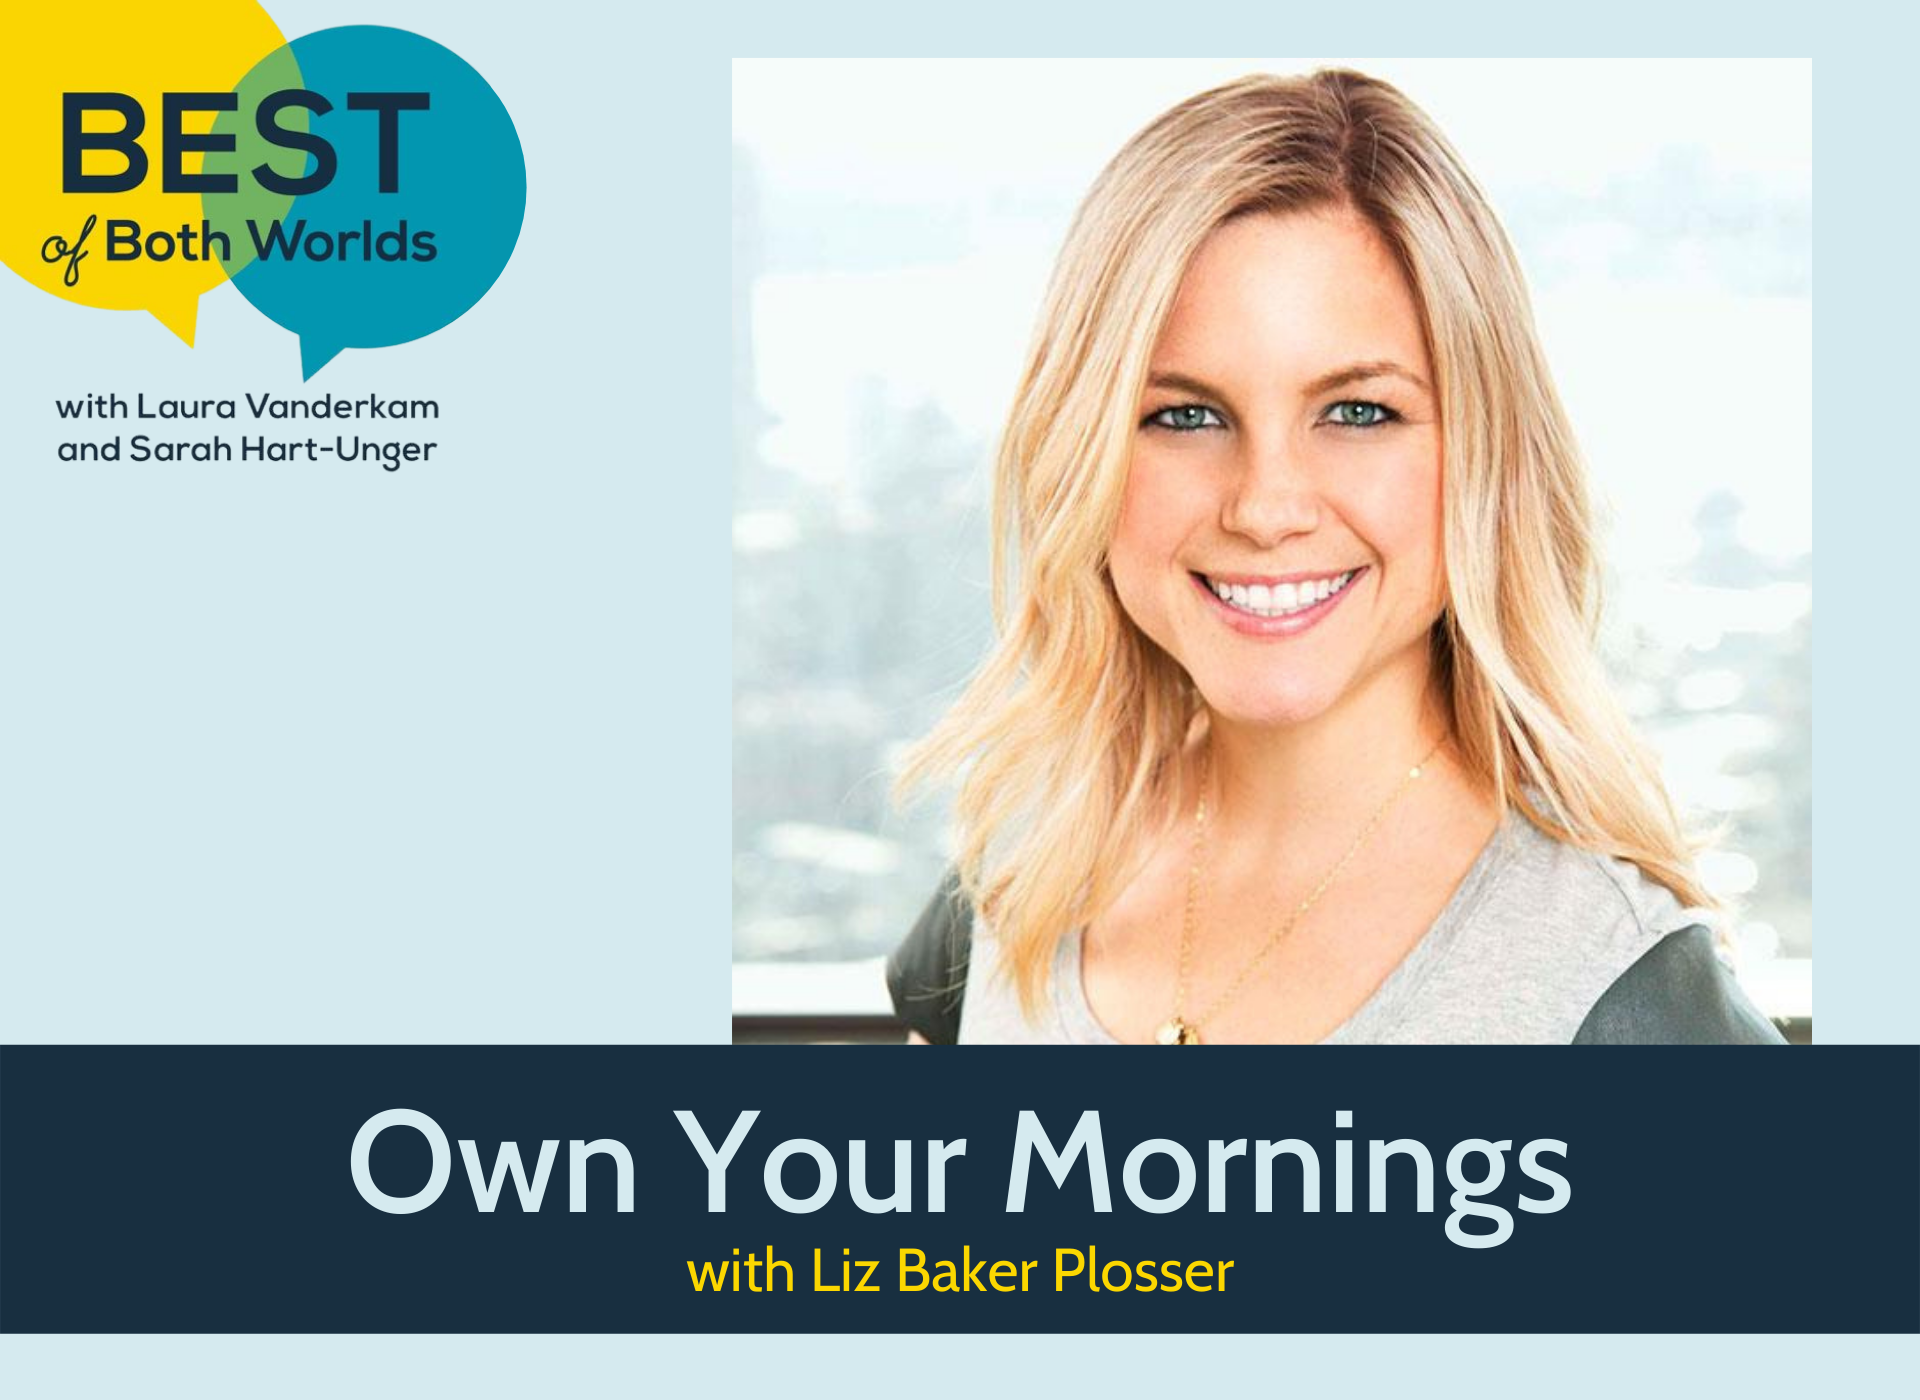 Best of Both Worlds podcast: Own your mornings with Liz Baker